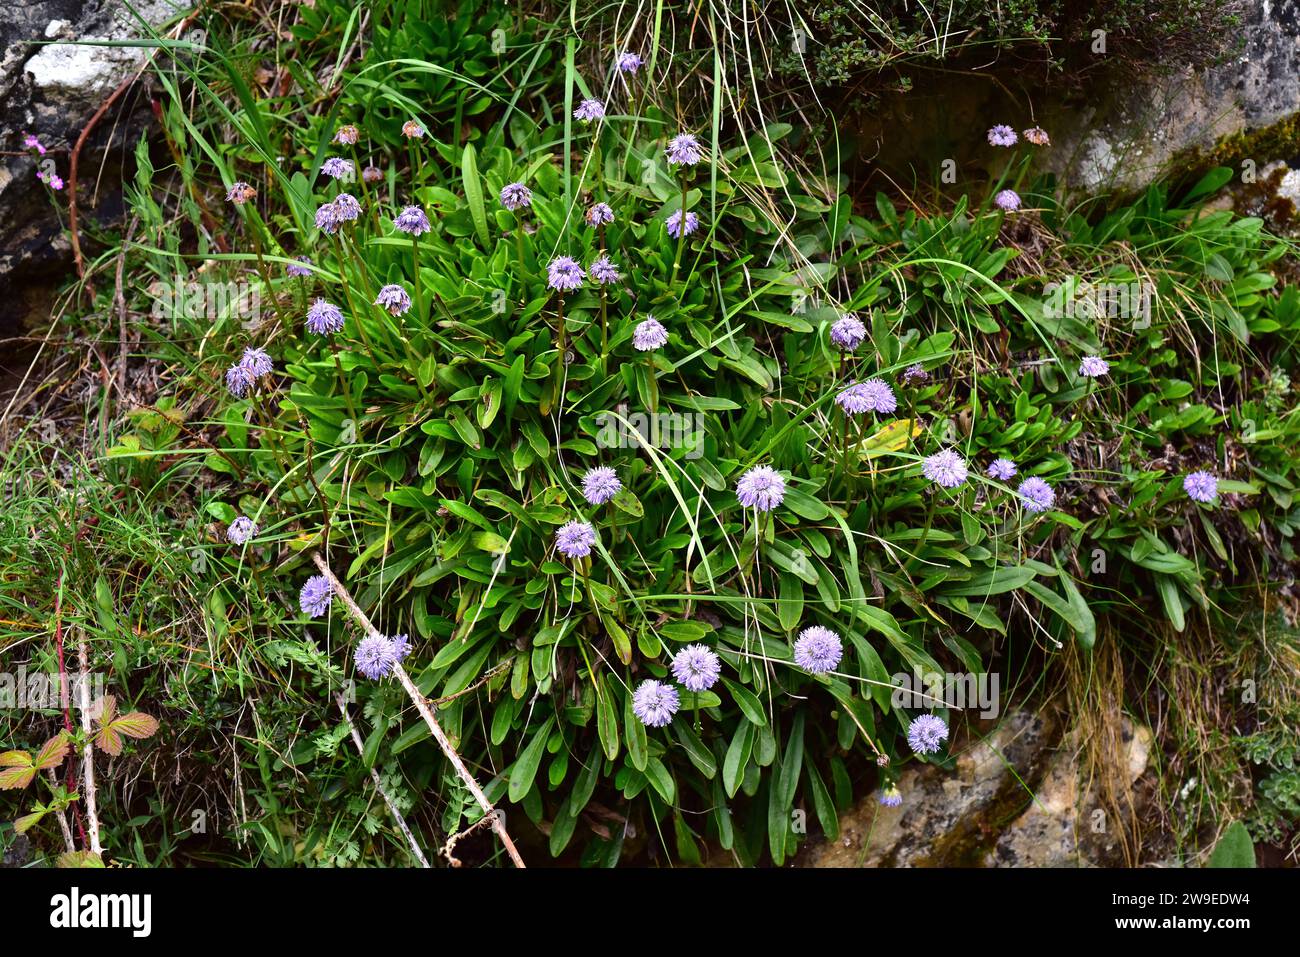 Heart-leaved globe daisy (Globularia cordifolia) is a perennial herb native to central and south mountains of Europe and Turkey. This photo was taken Stock Photo